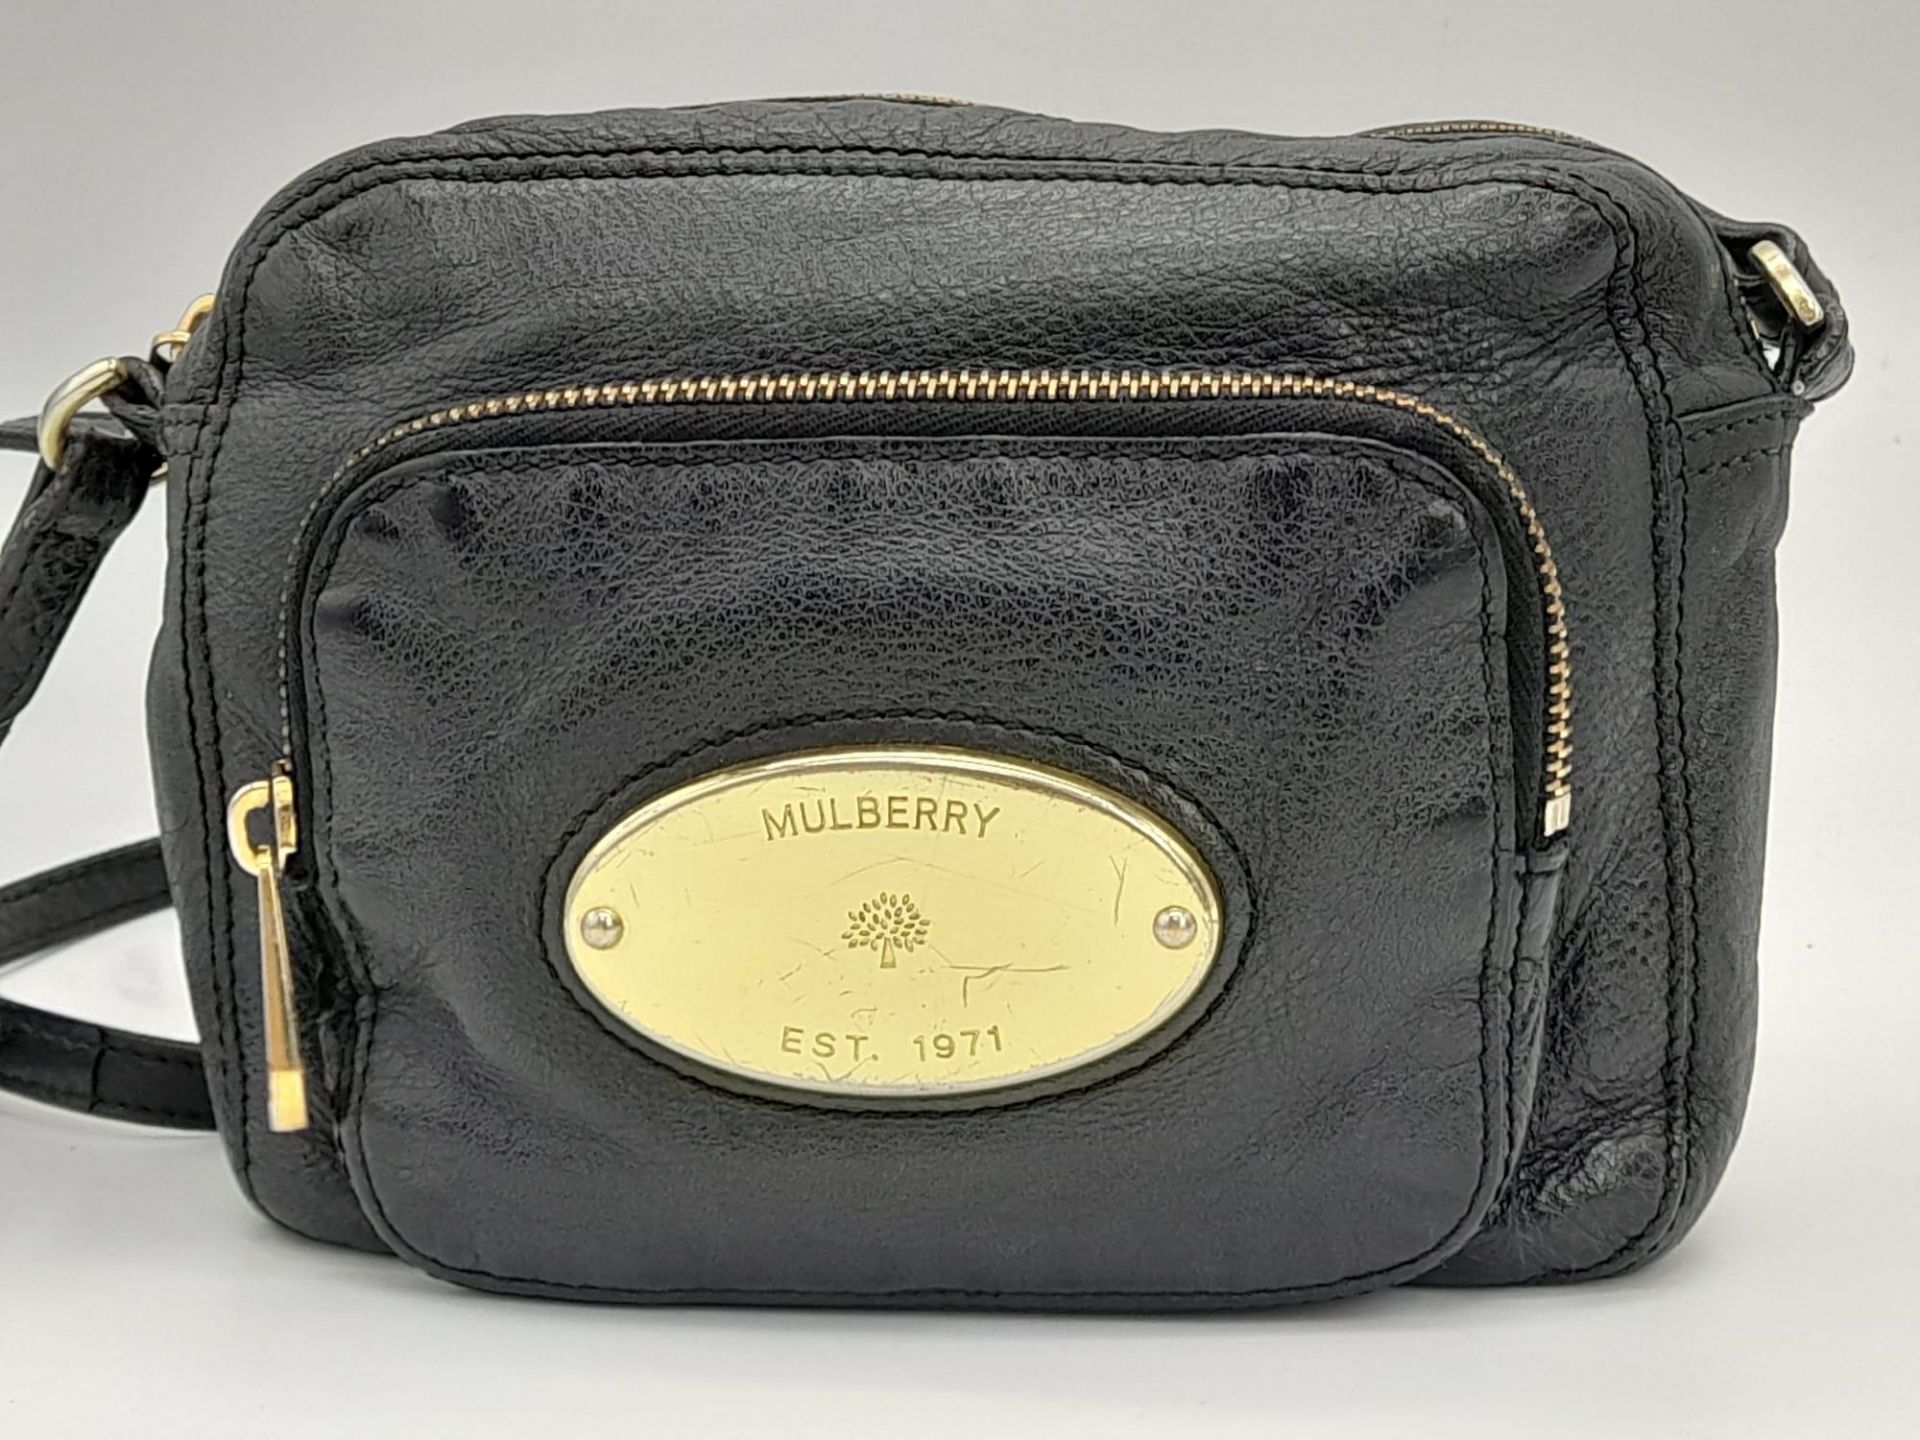 A MULBERRY DOUBLE ZIP SMALL SHOULDER BAG IN SOFT BLACK LEATHER. SEE PHOTO'S FOR CONDITION..